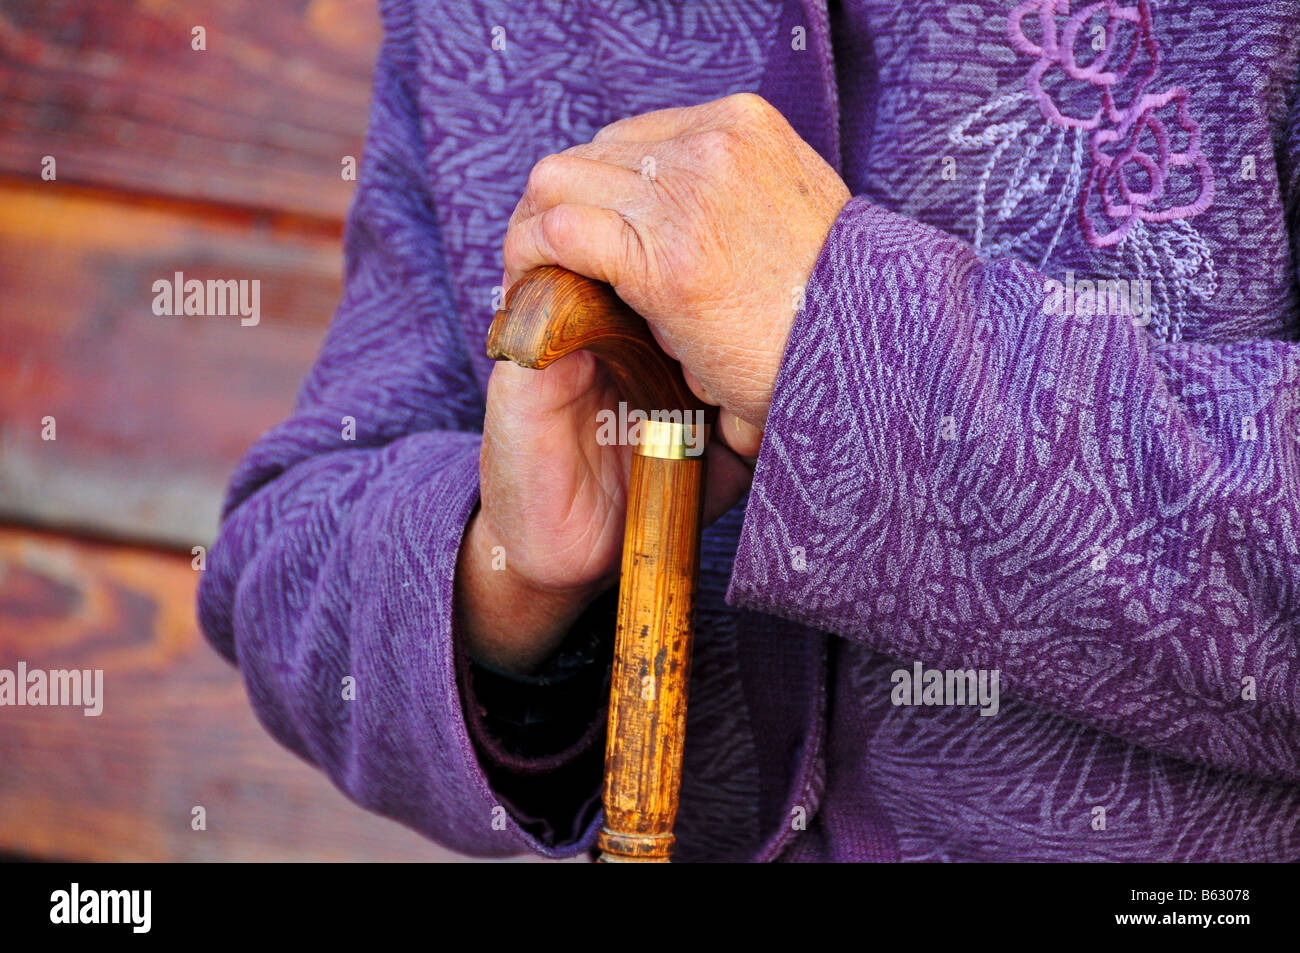 Elderly Woman Holding a cane Stock Photo